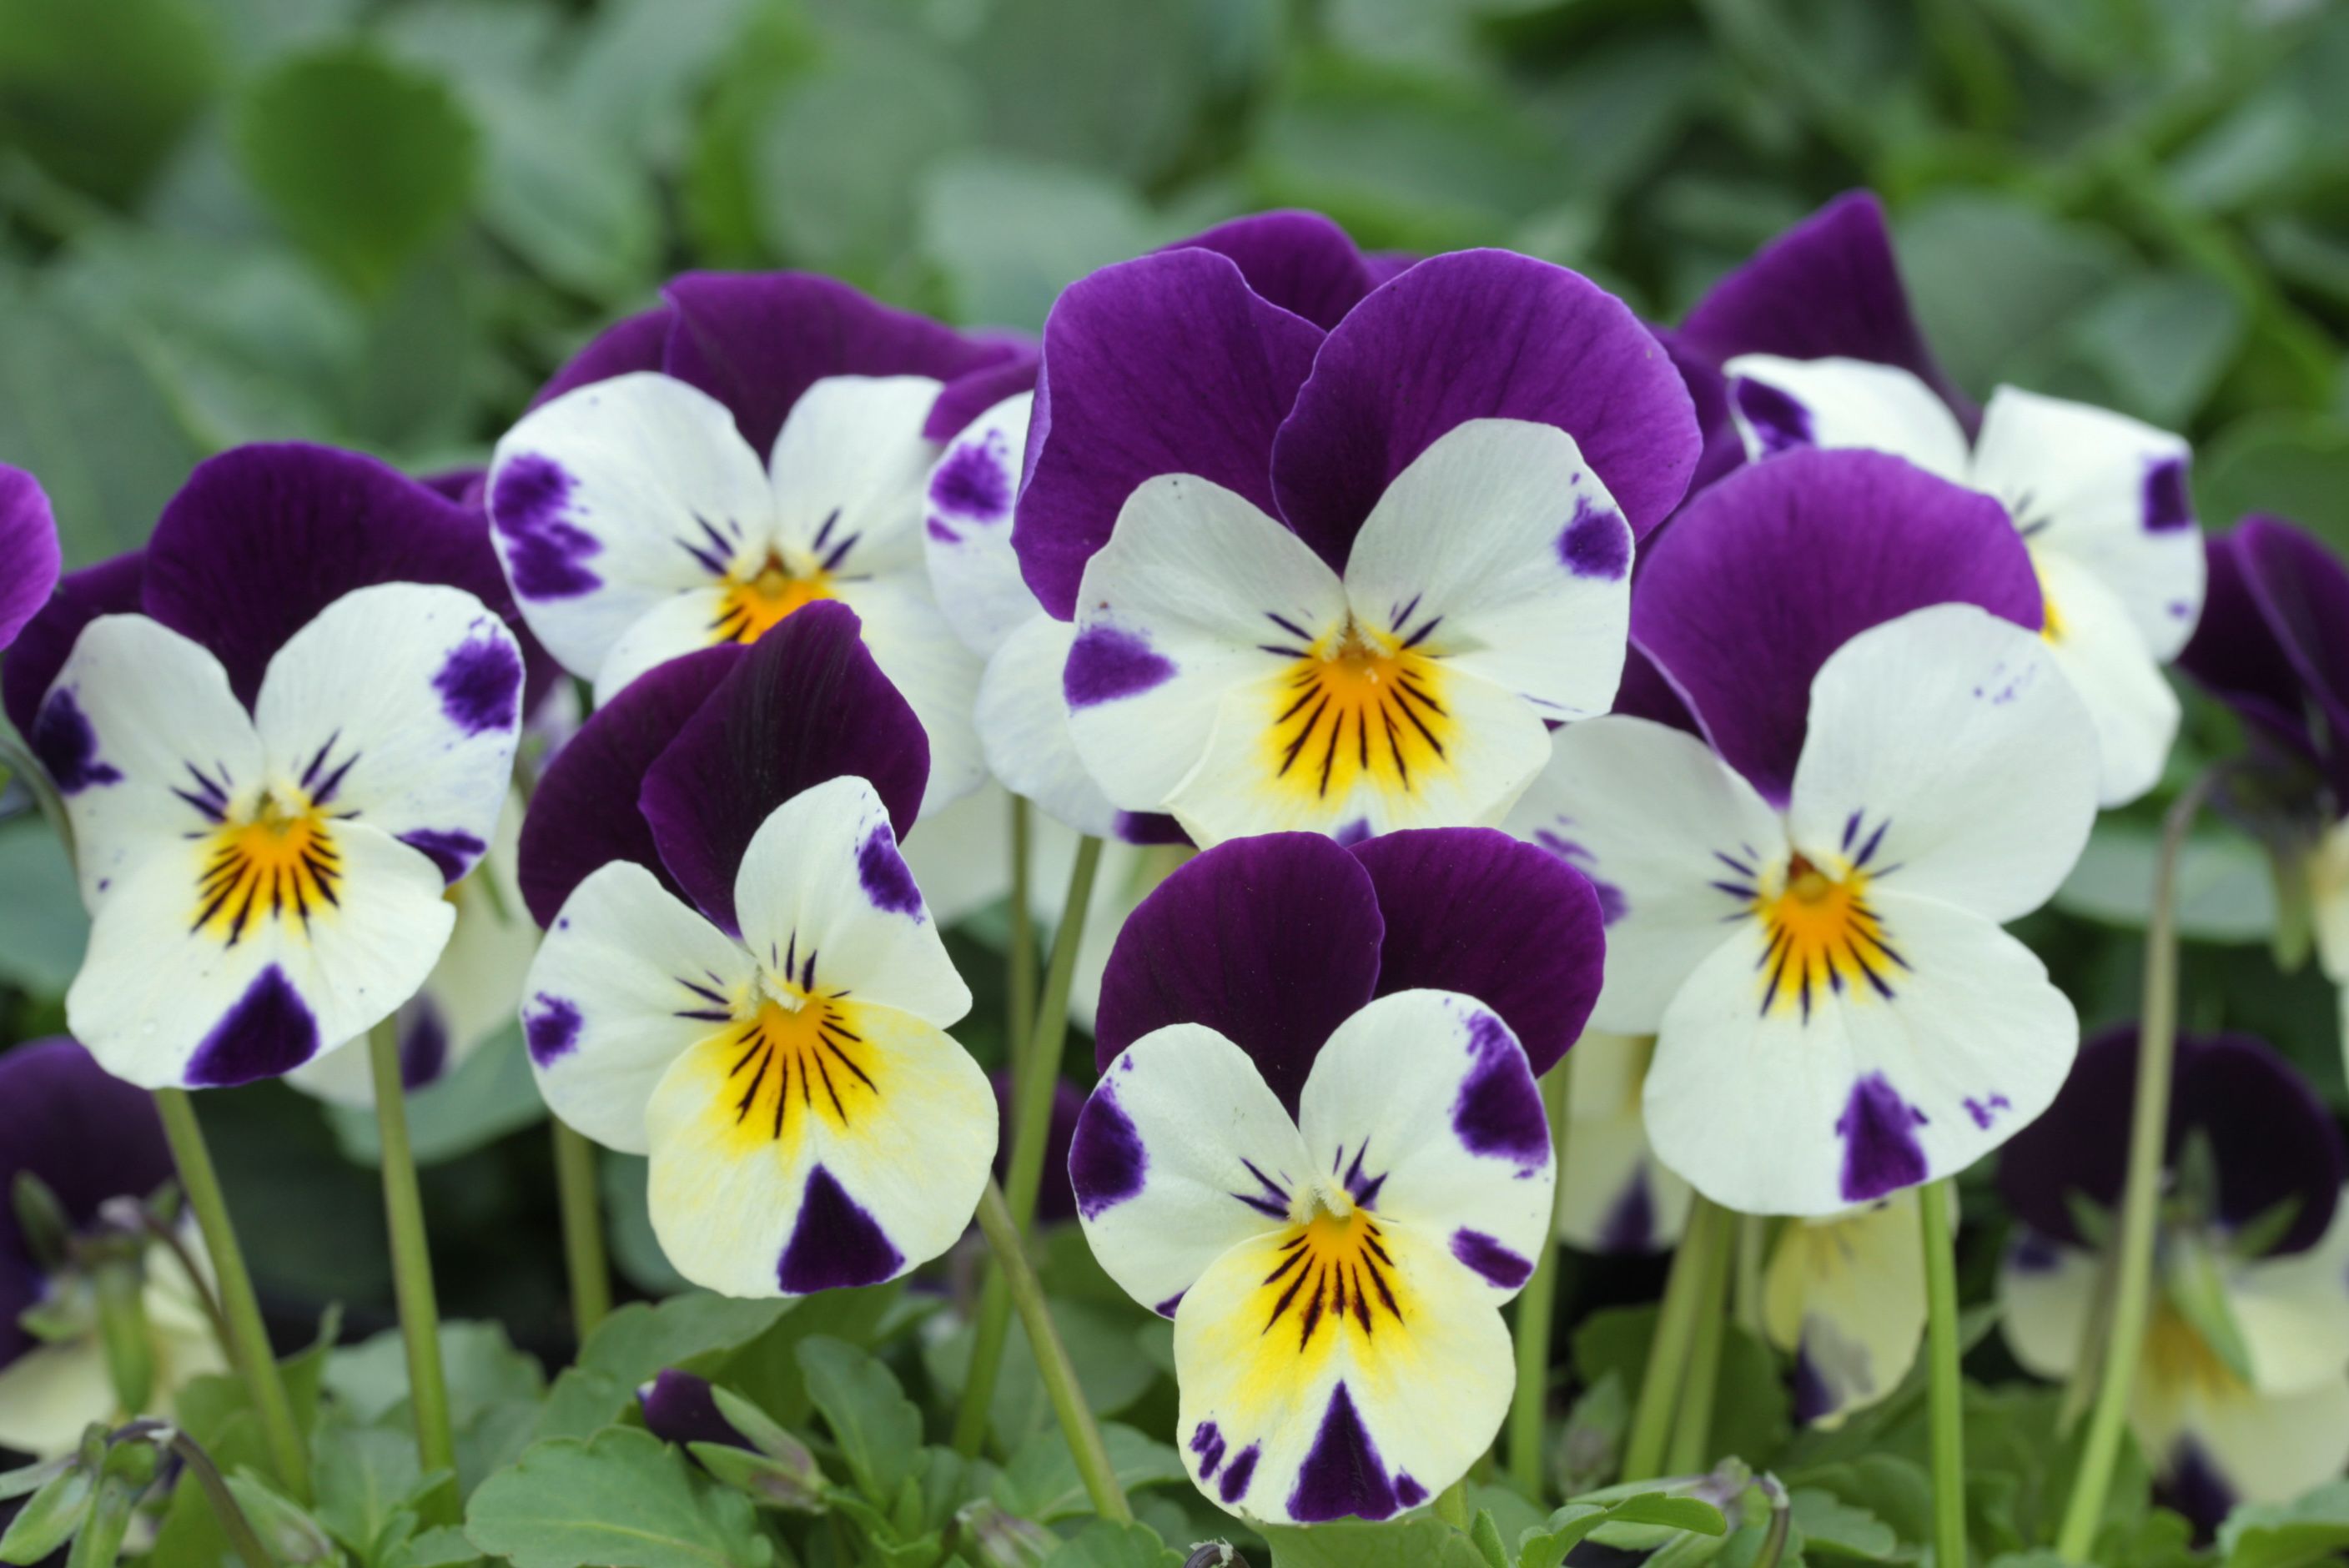 The 21 best plants and flowers for winter garden colour | Flowering ...